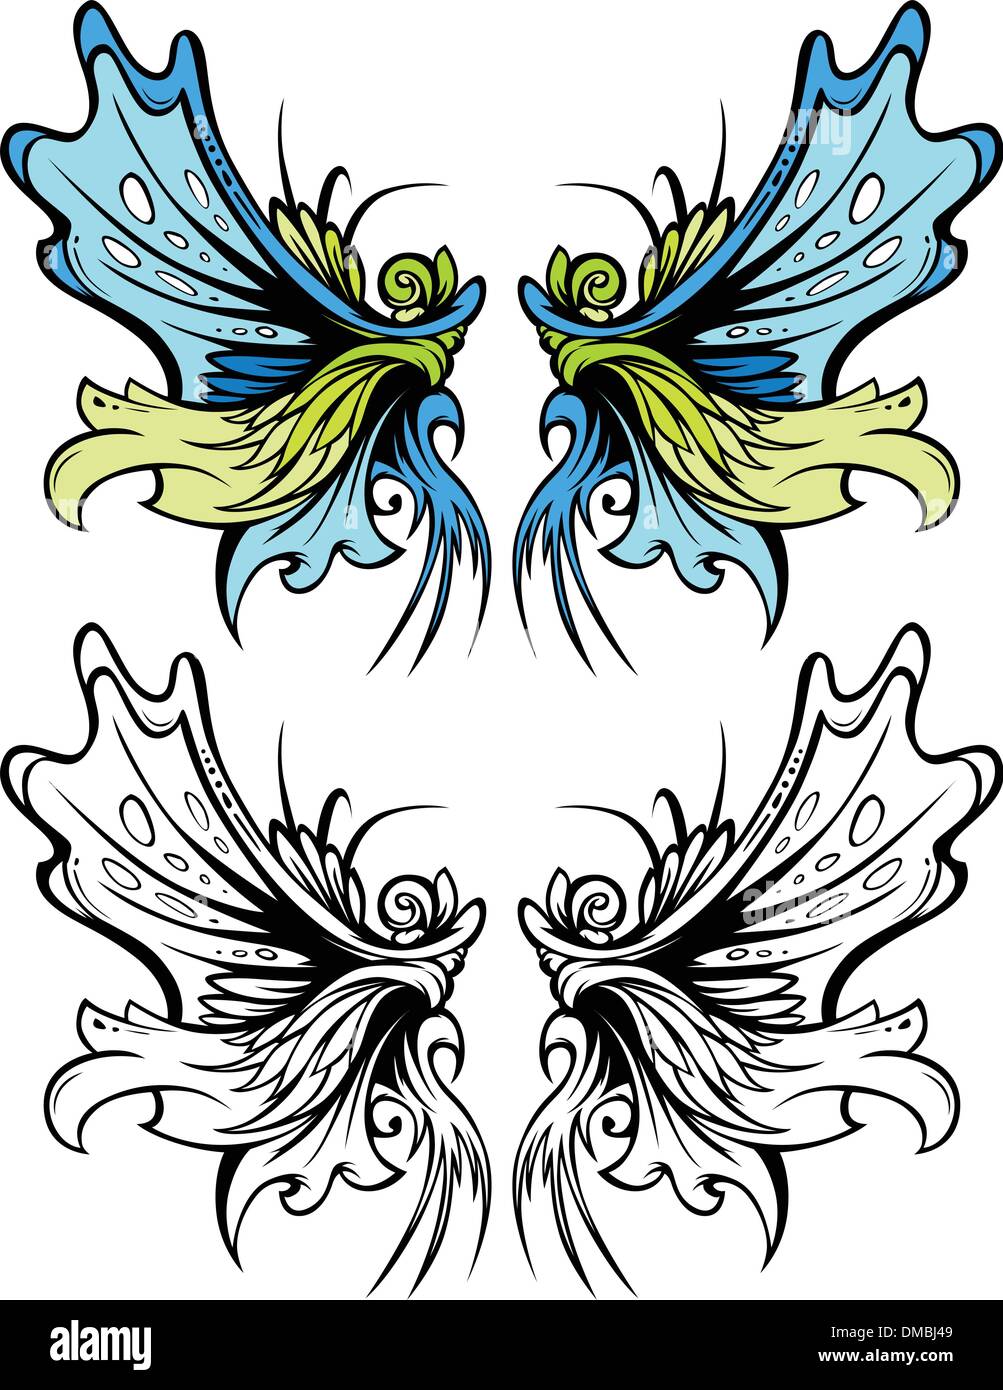 Fairy Wings Graphic Vector Set Stock Vector